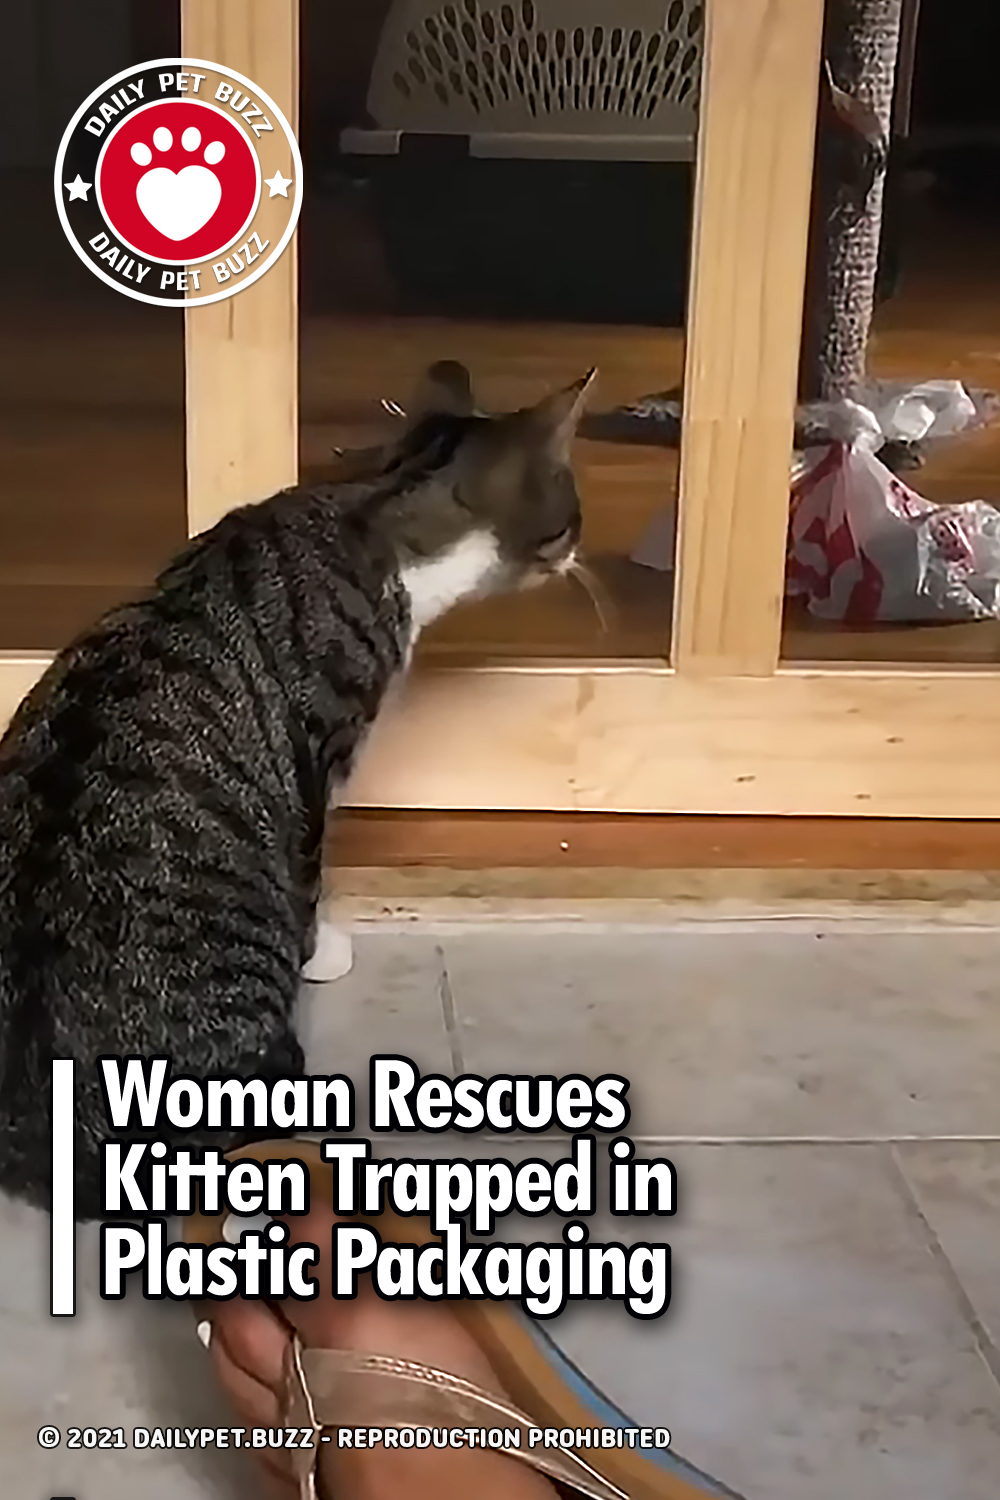 Woman Rescues Kitten Trapped in Plastic Packaging